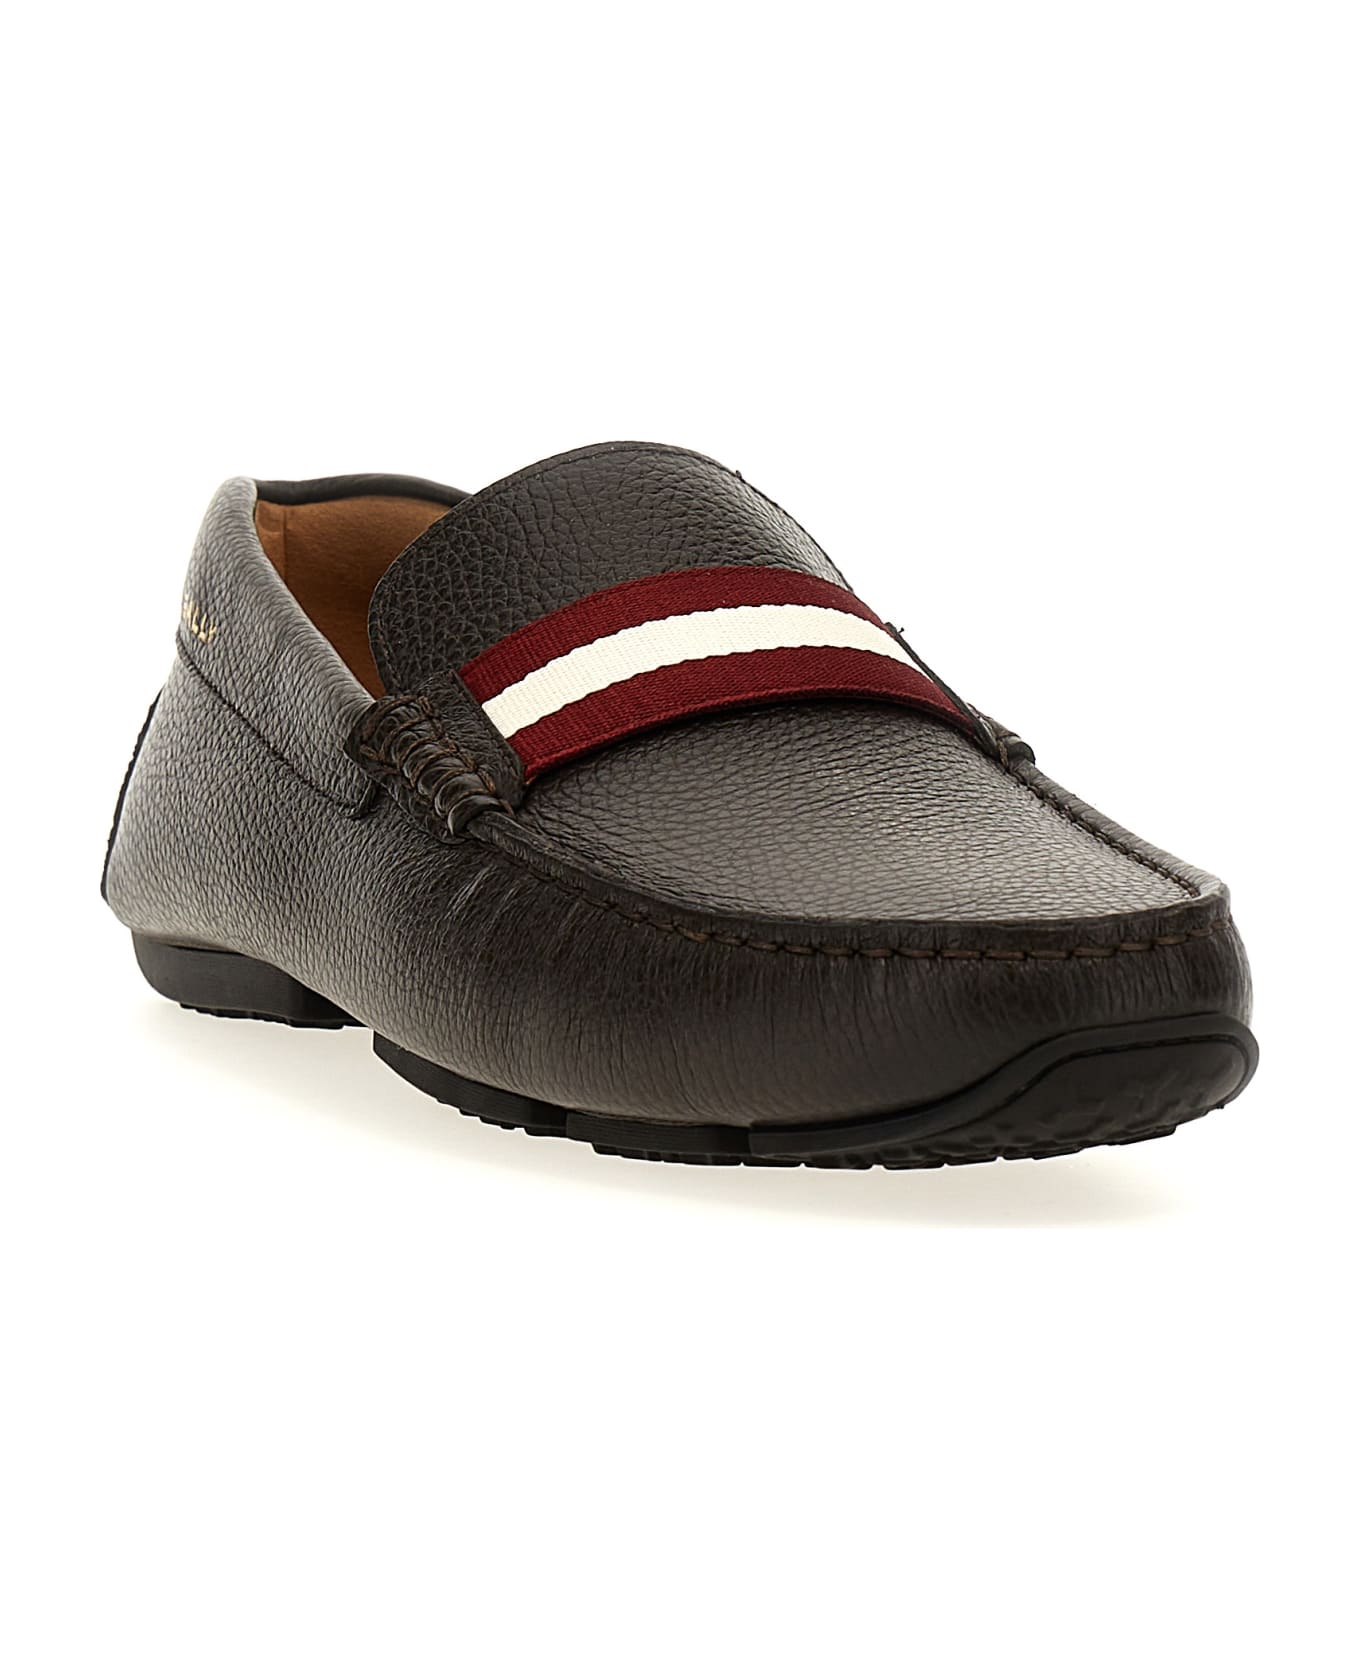 Bally 'perthy' Loafers - Brown